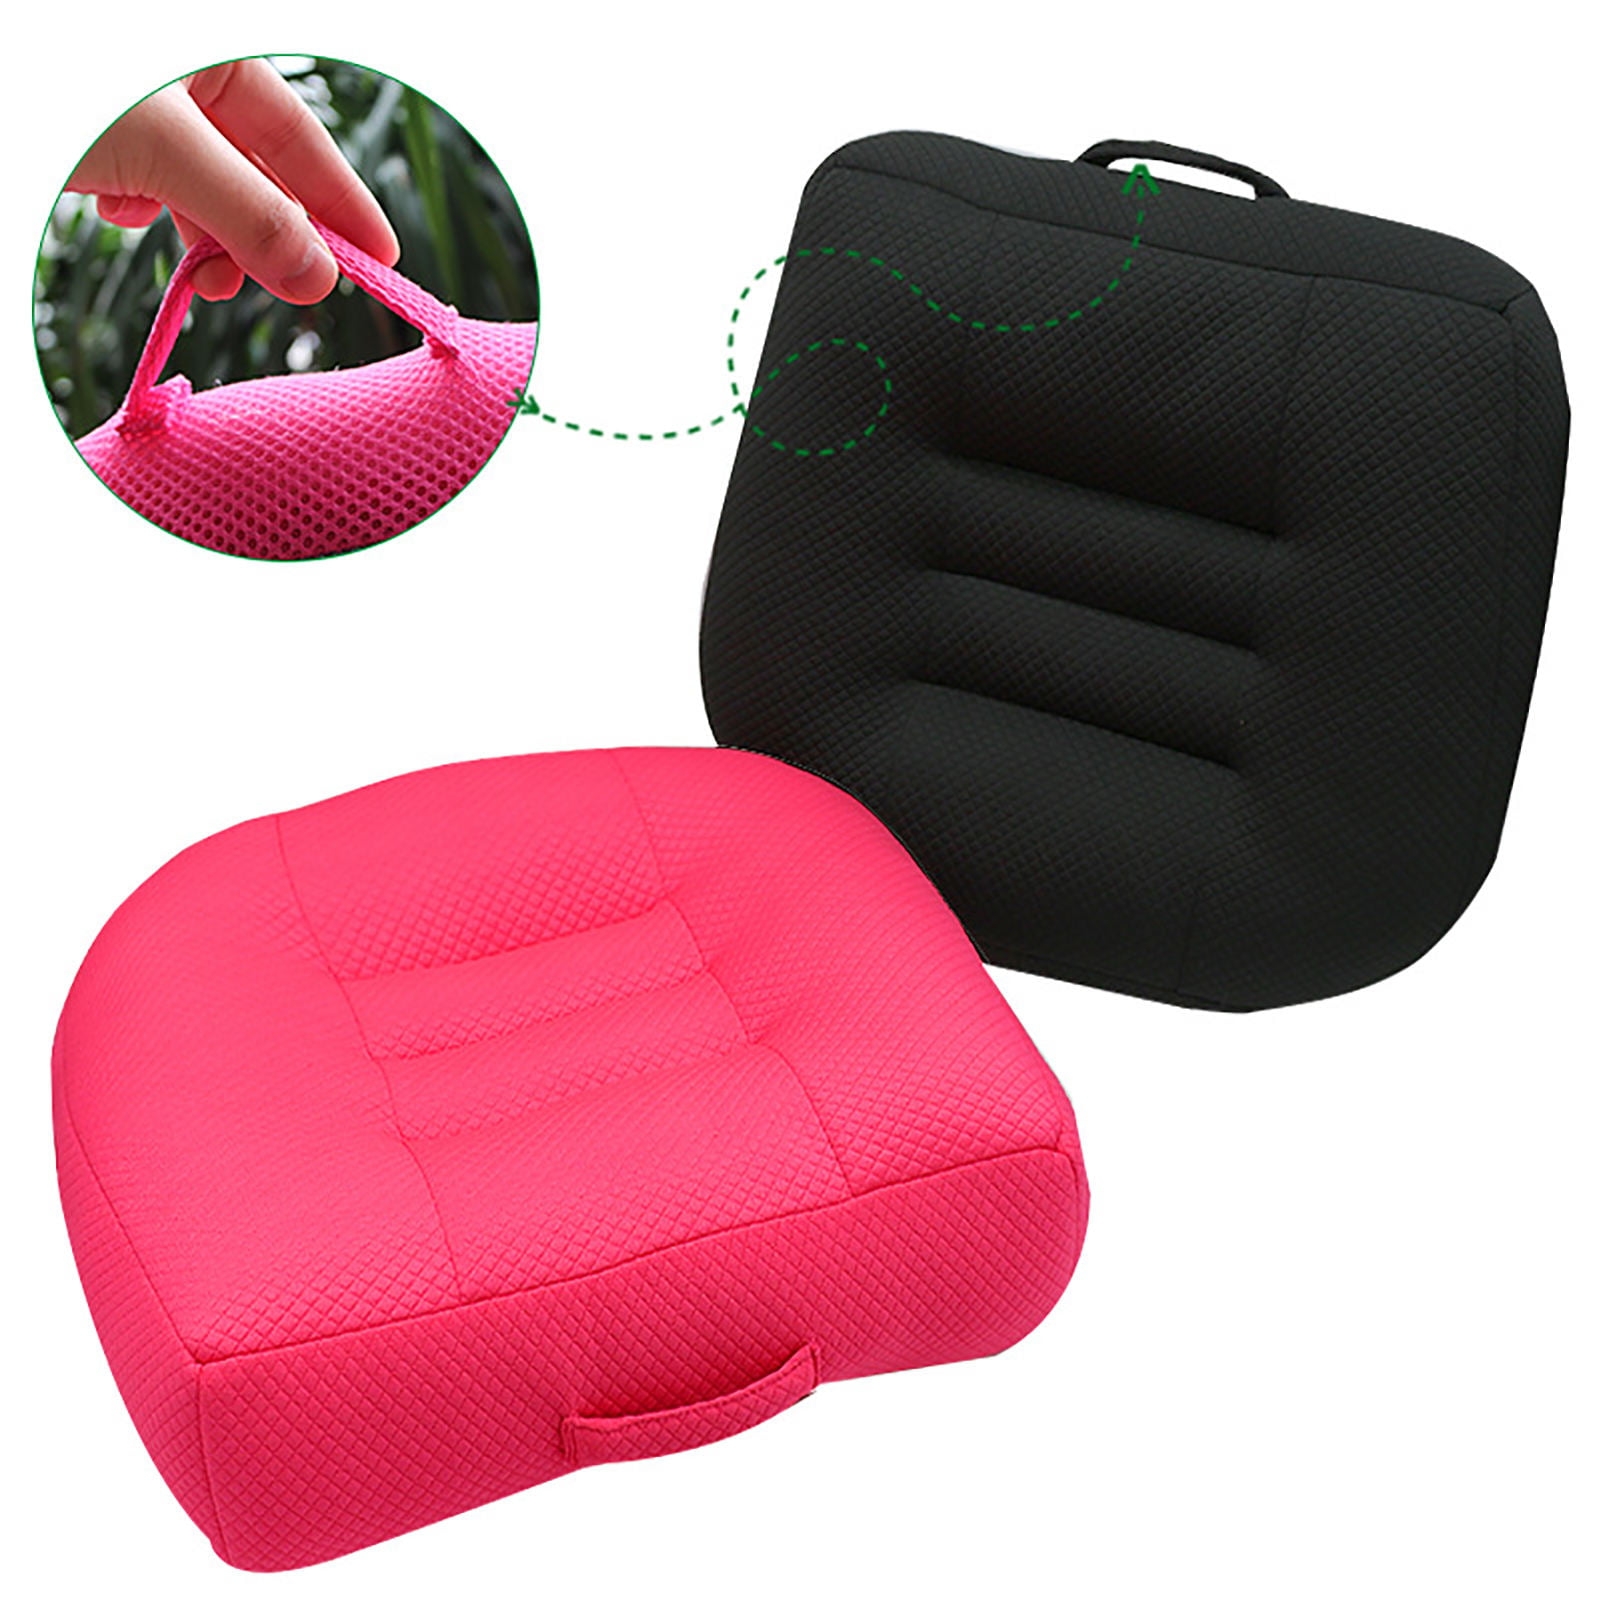 Lacyie Car Booster Seat Cushion Portable Car Seat Pad for Office Home 